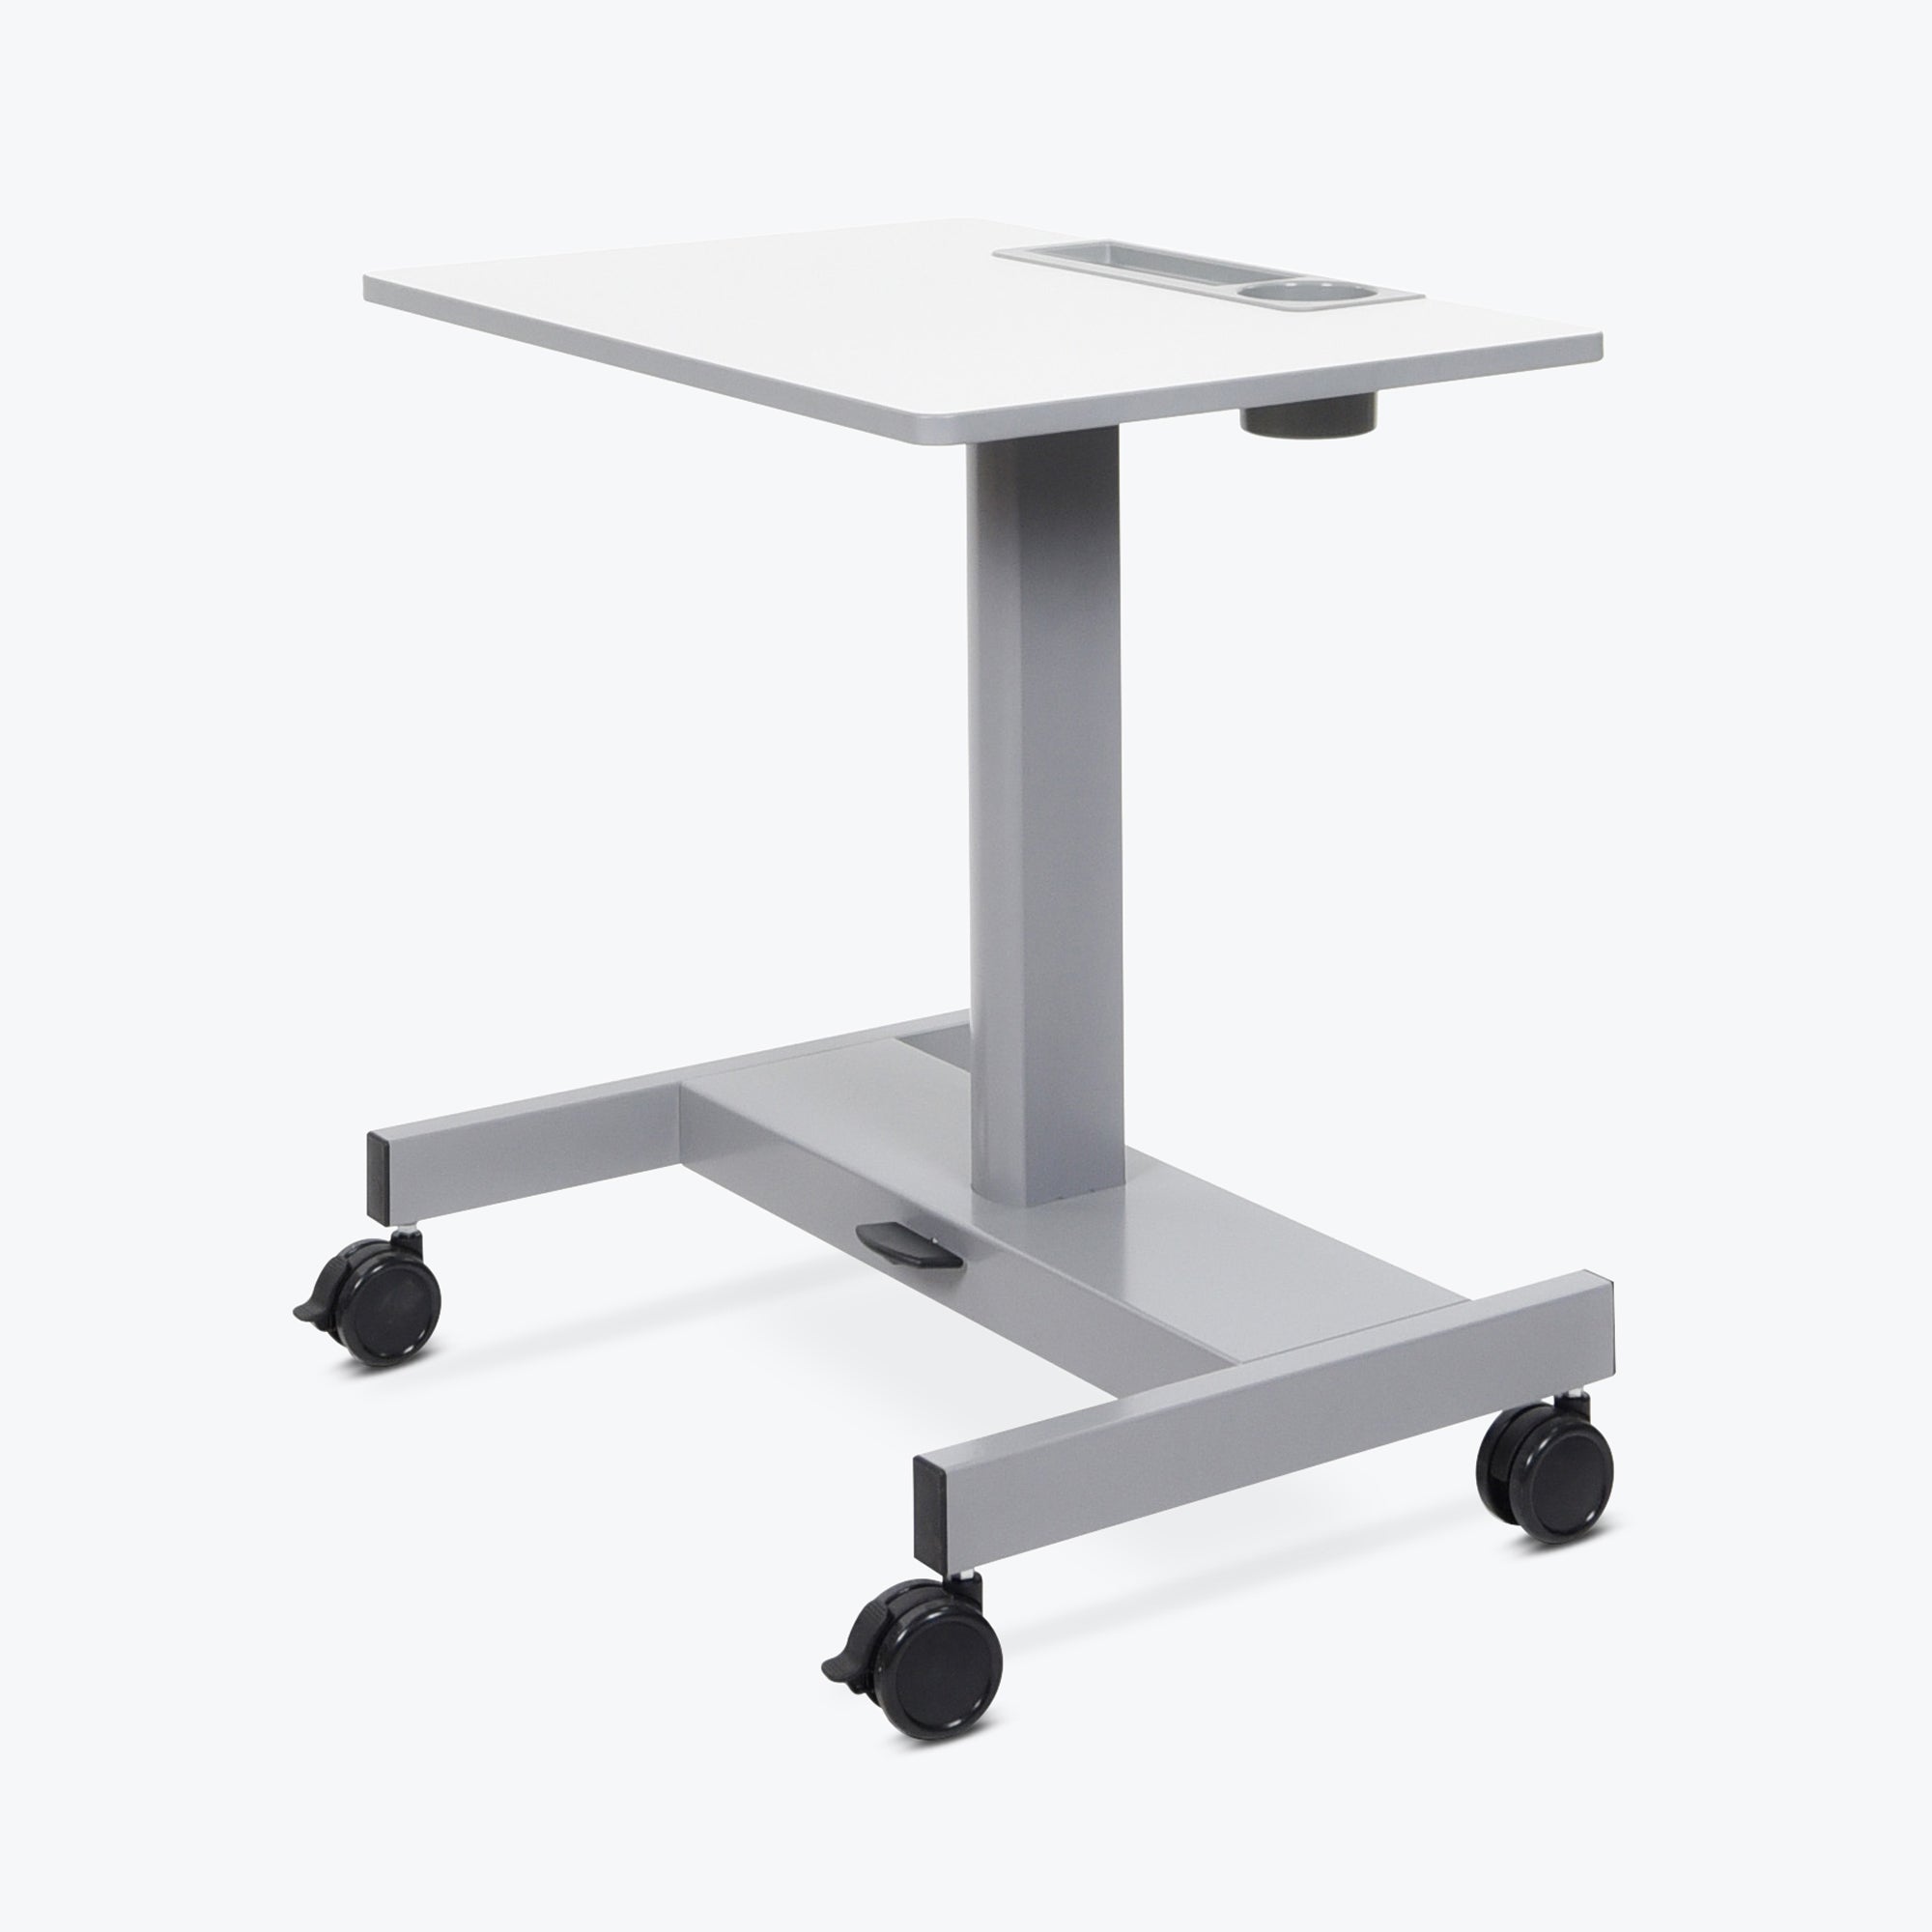 Luxor Adjustable Pneumatic Sit/Stand Desk (Gray) - STUDENT-P